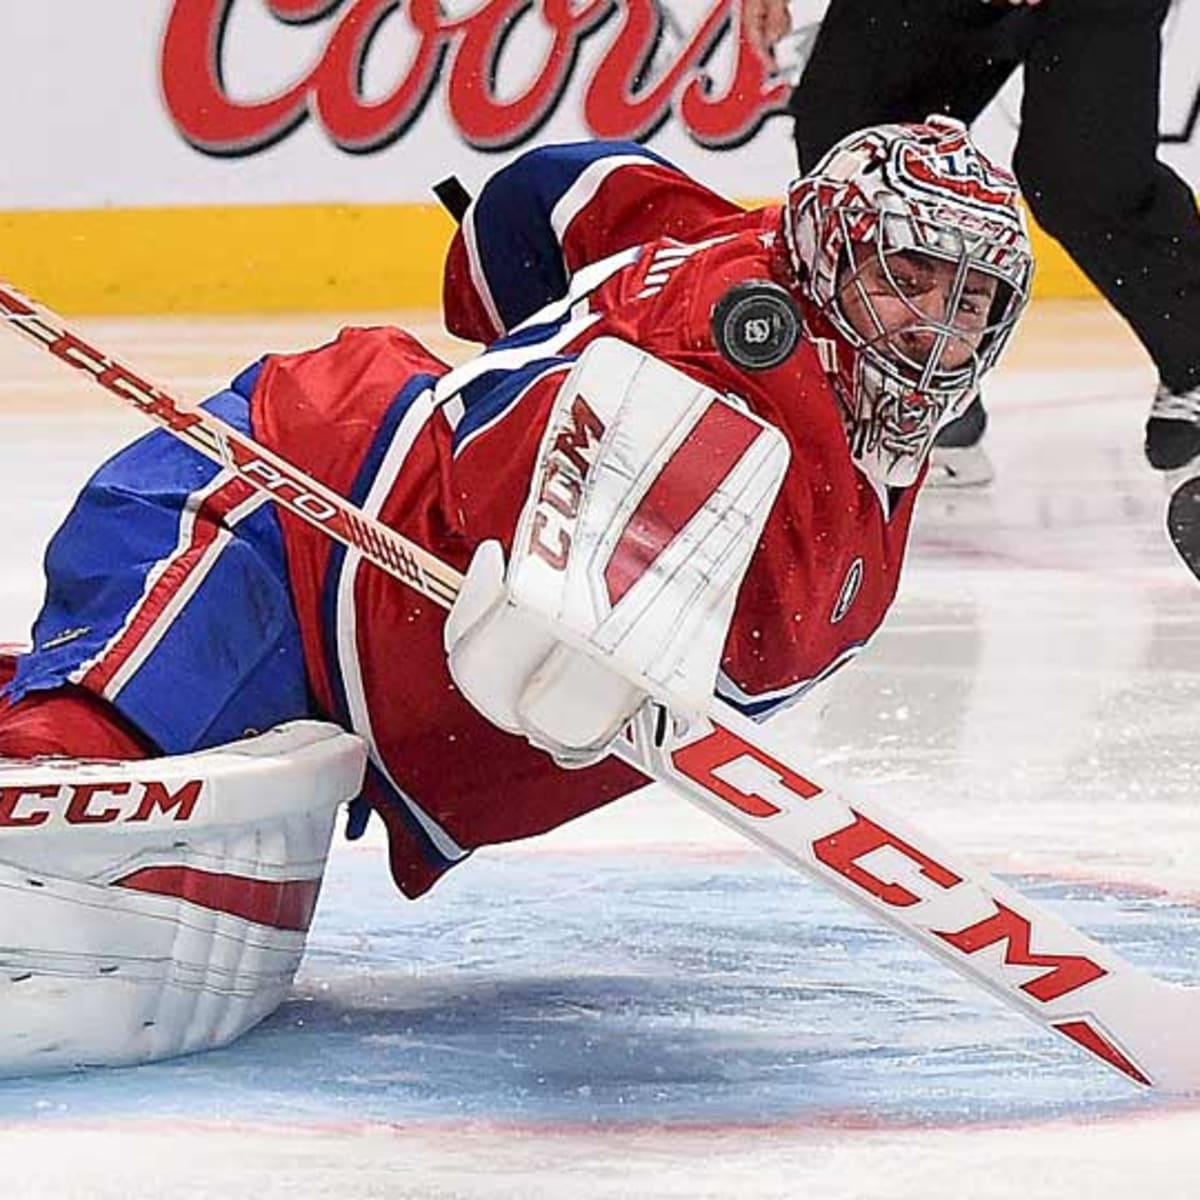 Montreal Canadiens' Carey Price voted Canada's male athlete of 2015